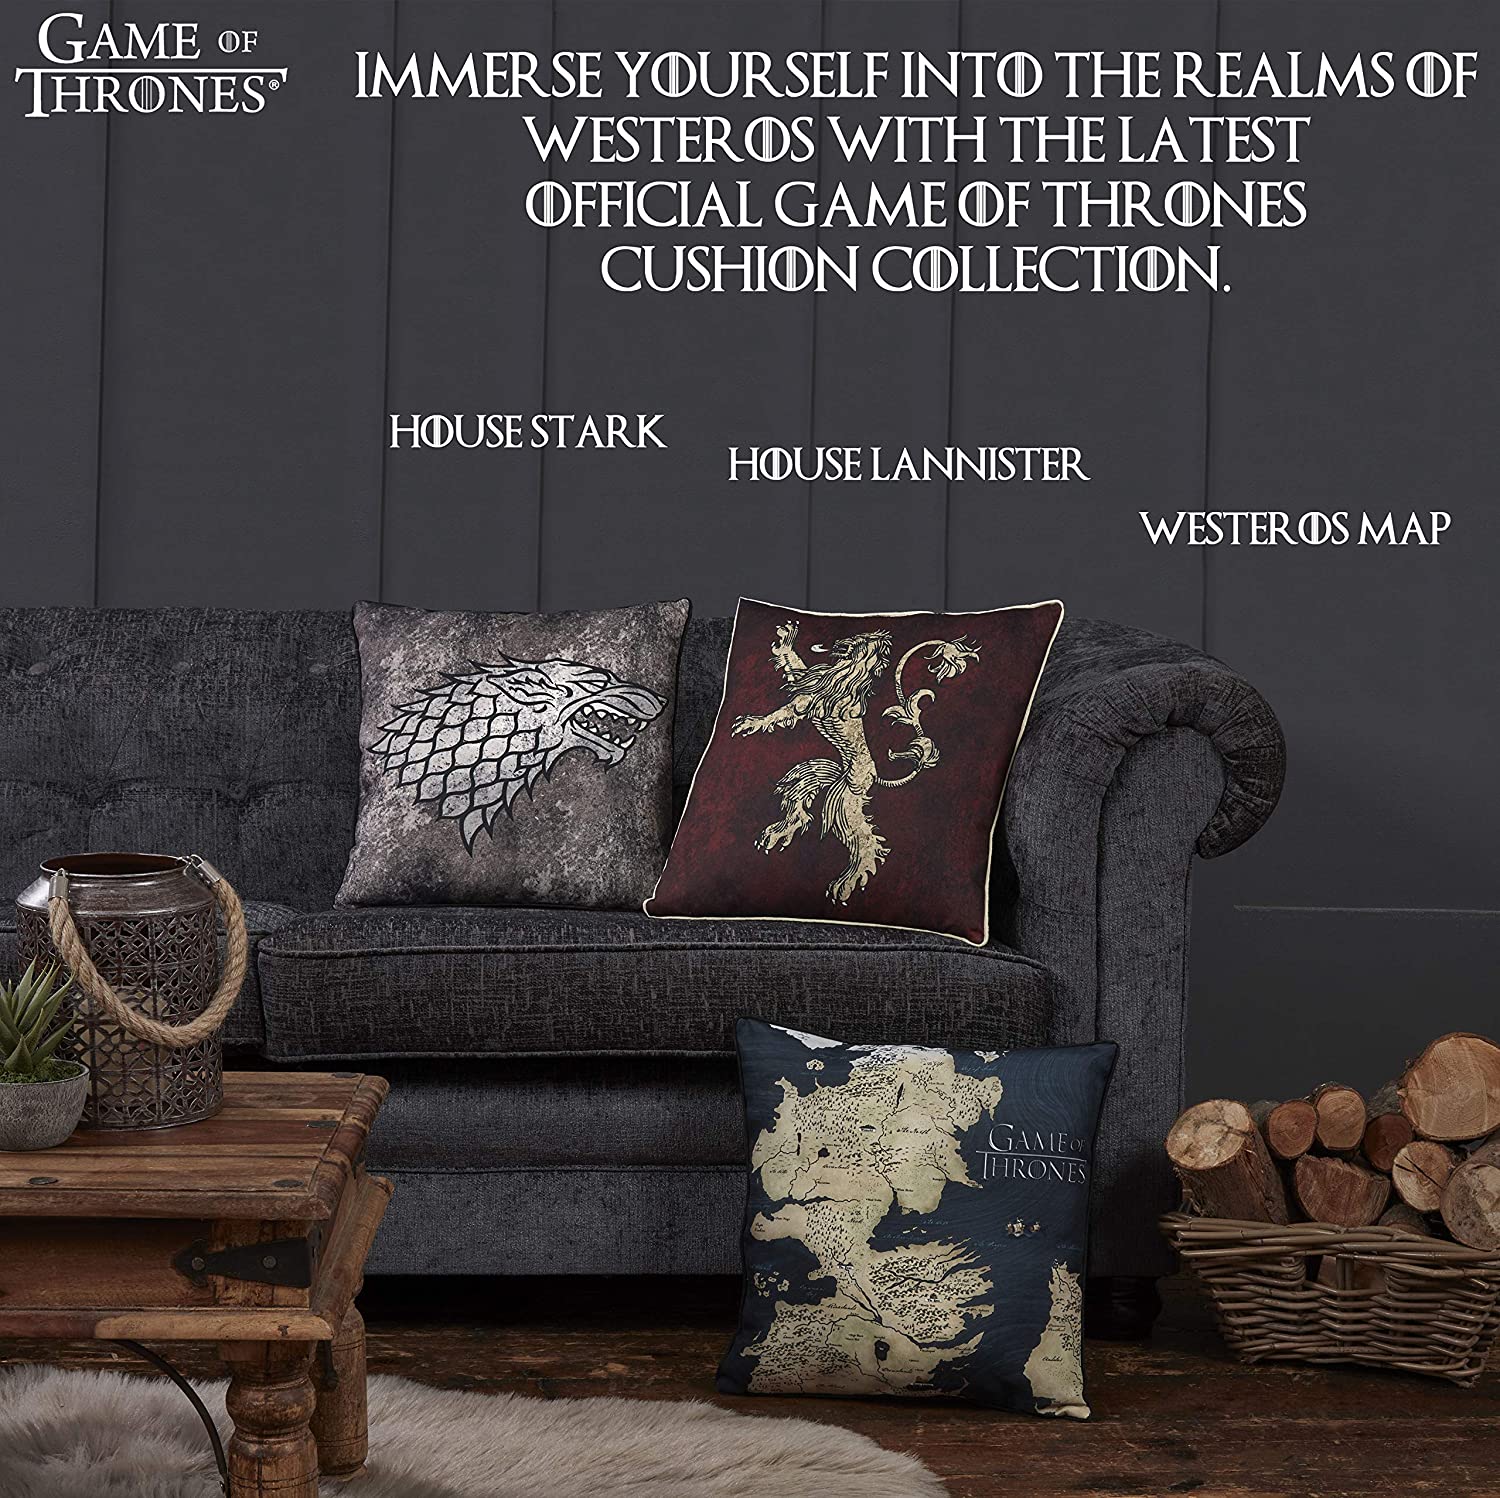 36 x Game Of Thrones Cushions ( 40cmx40cm) 12 of each 3 designs will be sent.